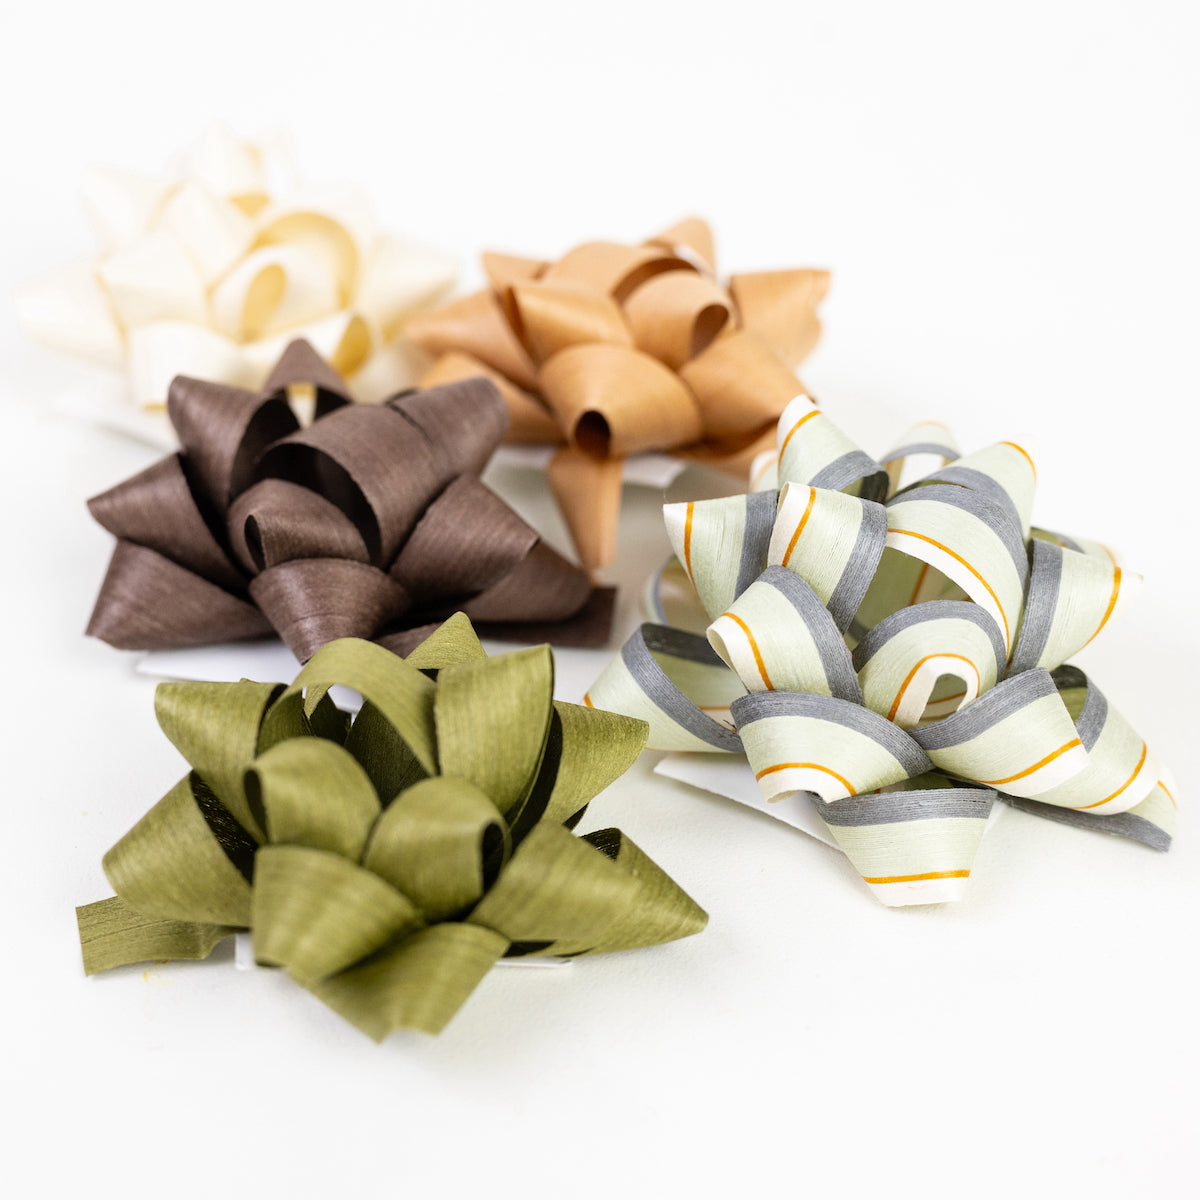 Natural Cotton Curling Ribbon for Gift Wrapping | 100% Biodegradable  Holiday Gift Ribbons for Presents & Ribbons for Crafts | Brown Colored  Curling